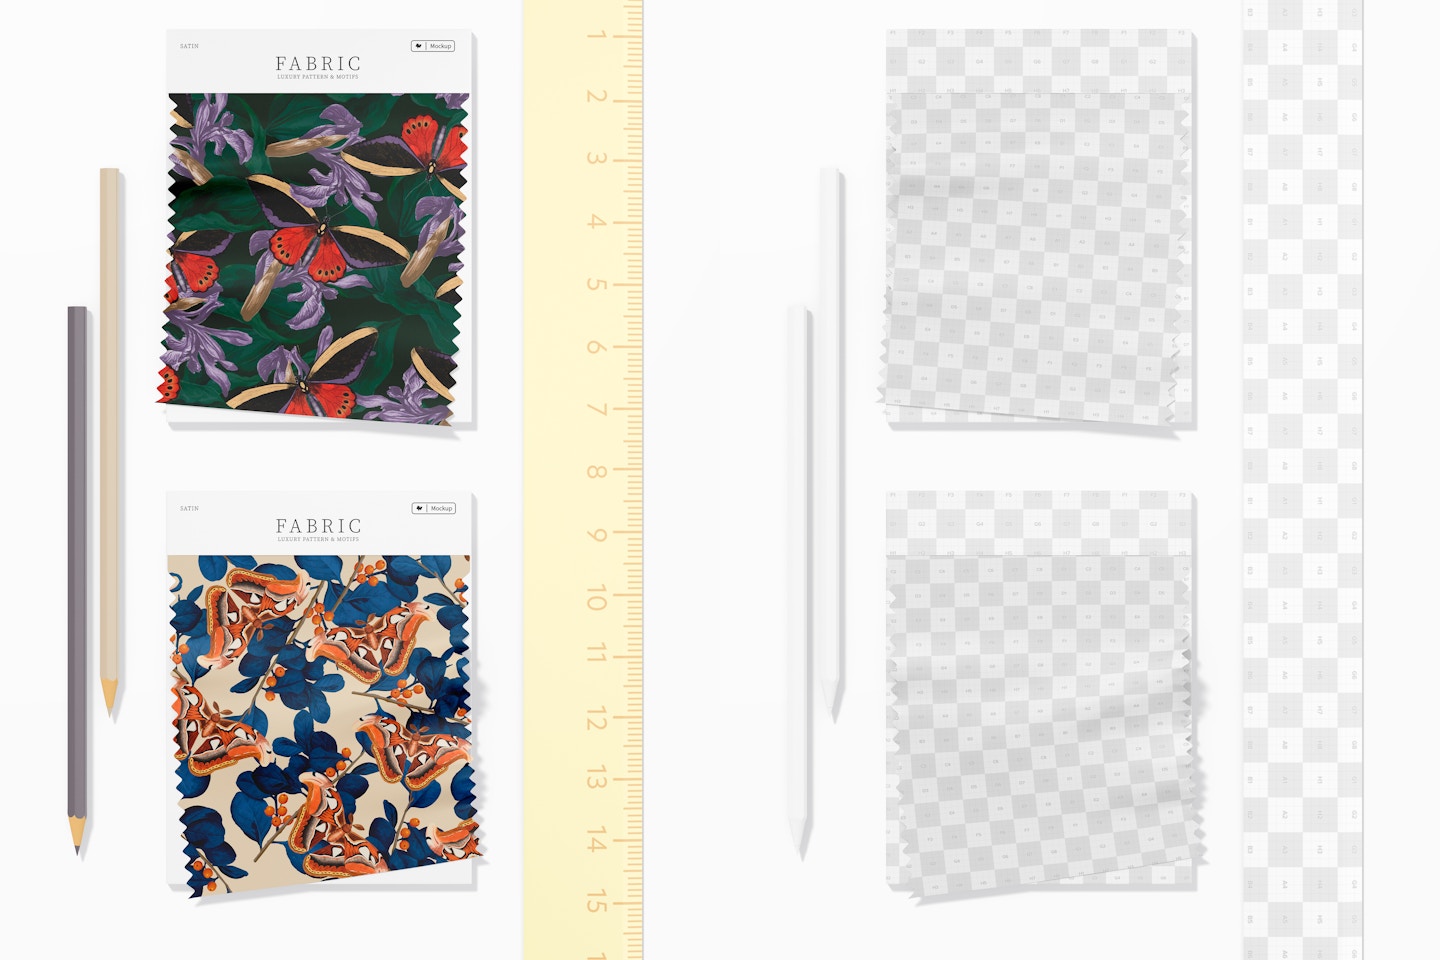 Satin Fabric Swatches Mockup, Top View 02